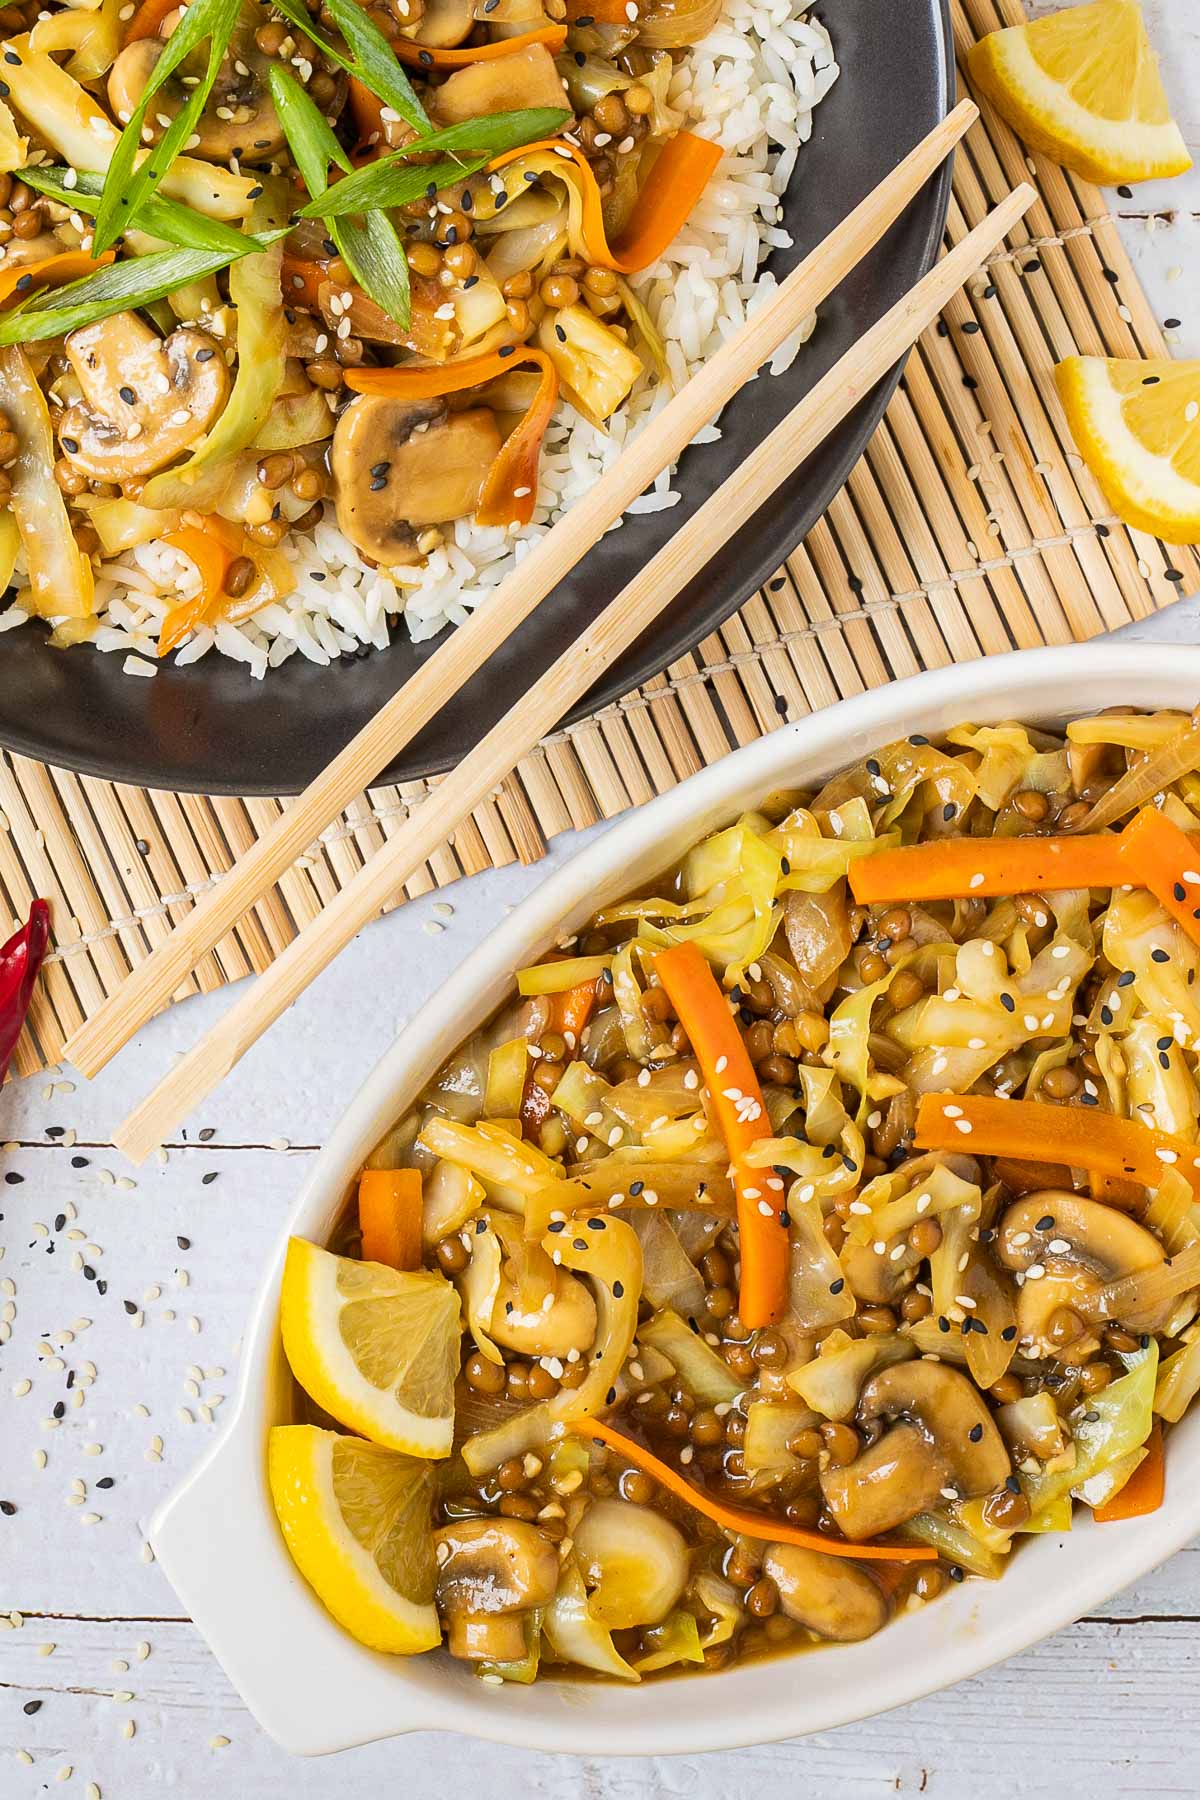 Black plate with white rice topped with stir fired cabbage, mushroom, carrot and lentils. A pair of chopsticks is placed on the side. More stir fried veggies are placed in a separate white bowl.